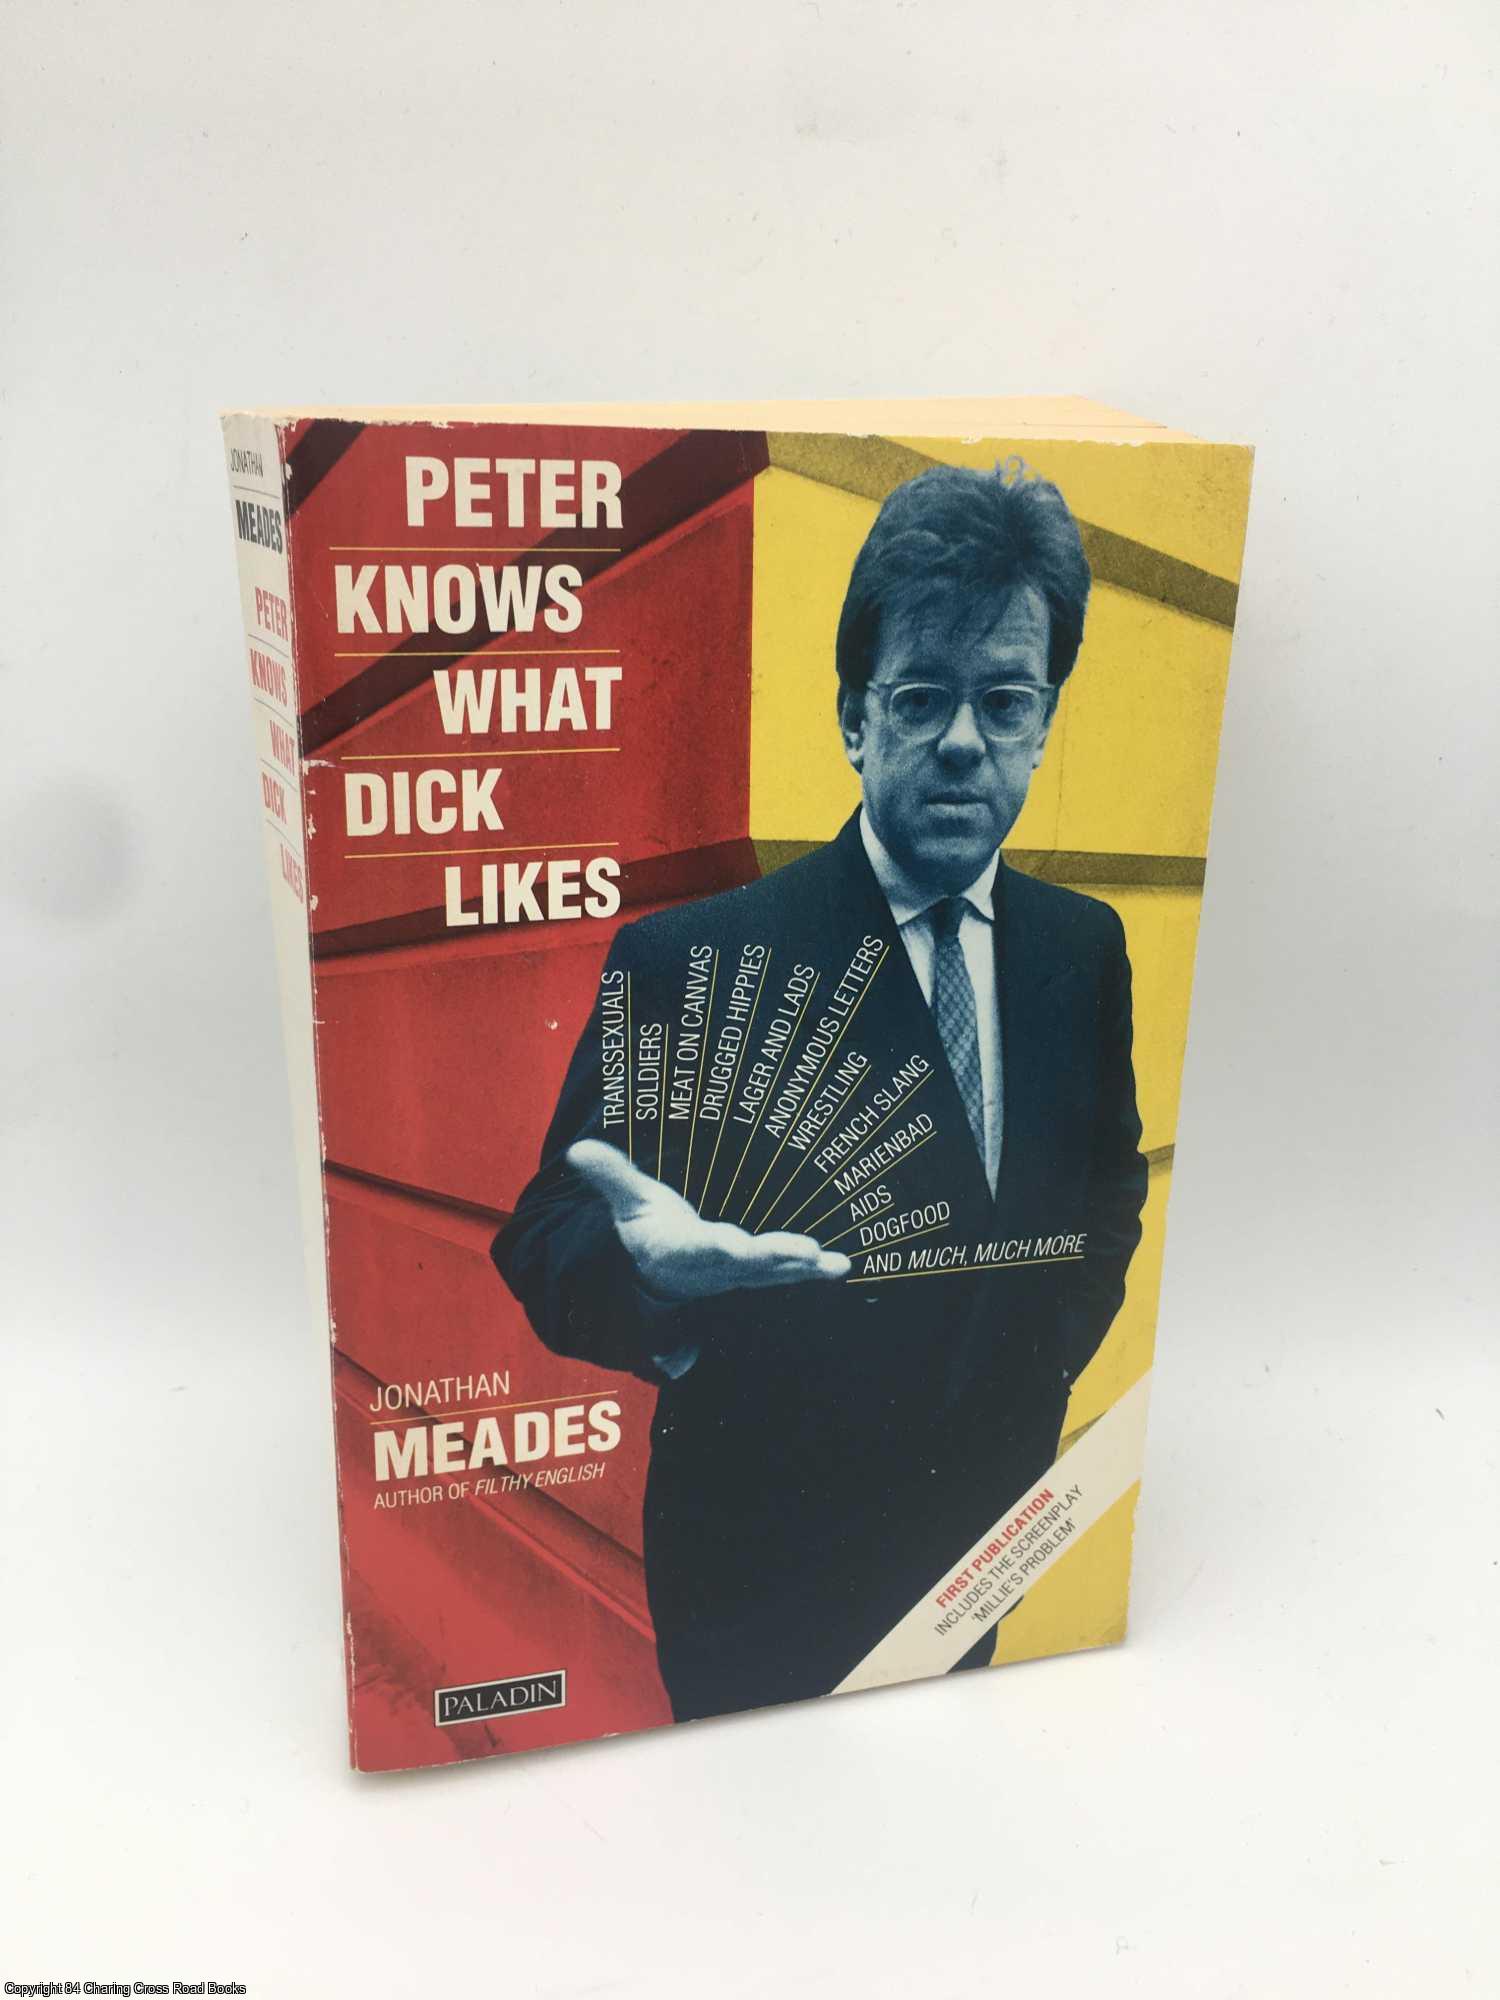 Meades, Jonathan - Peter Knows What Dick Likes